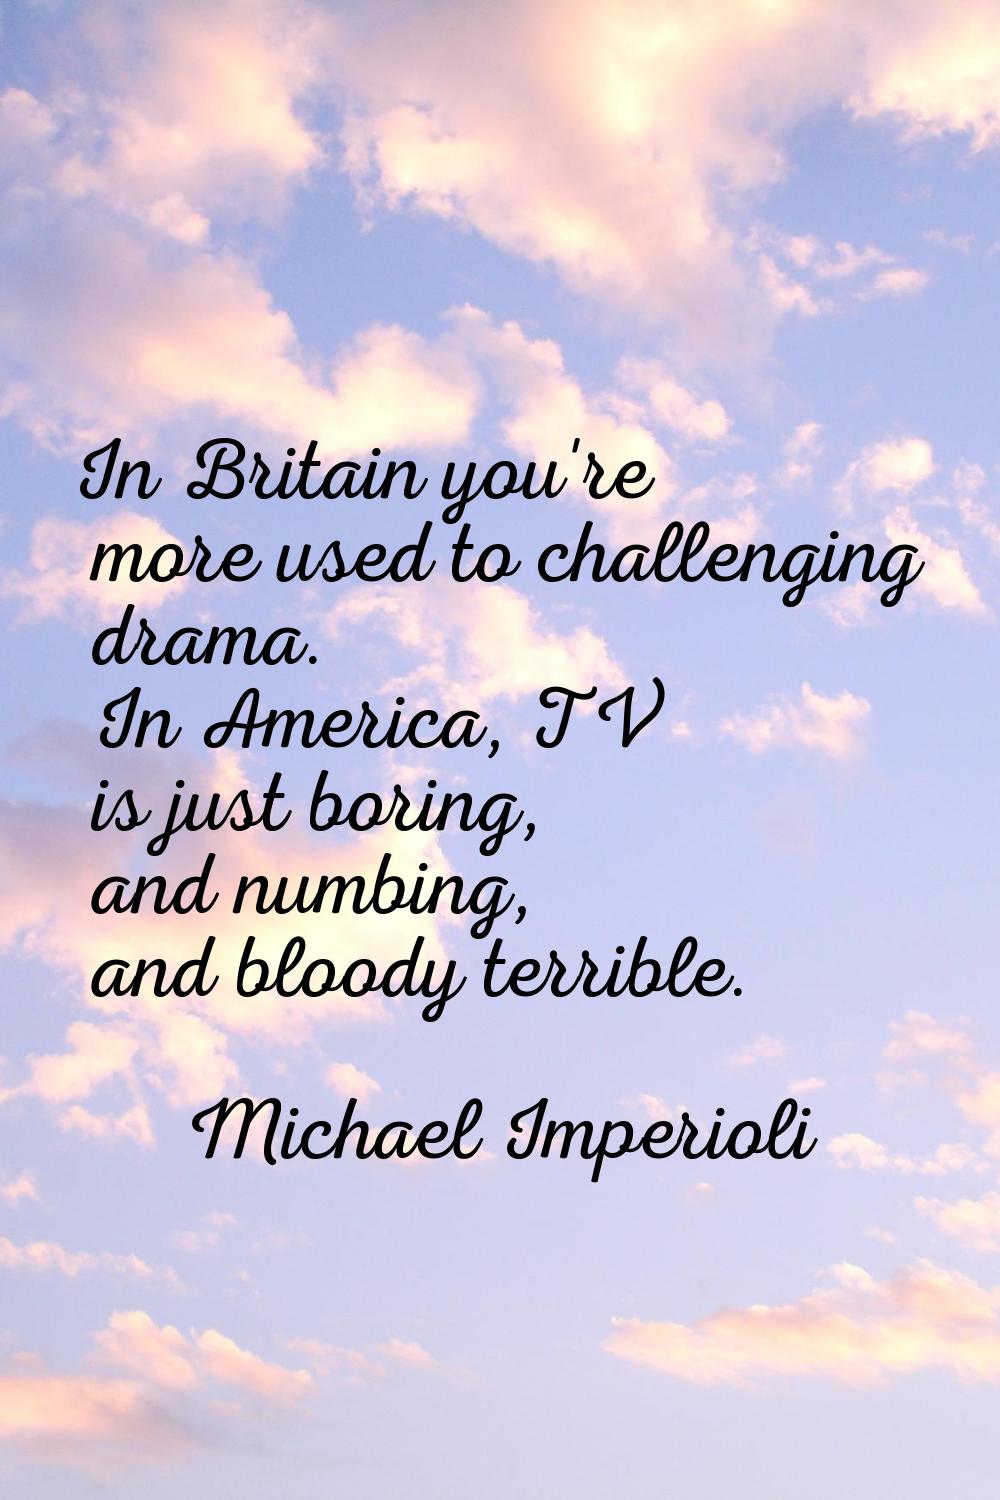 In Britain you're more used to challenging drama. In America, TV is just boring, and numbing, and b